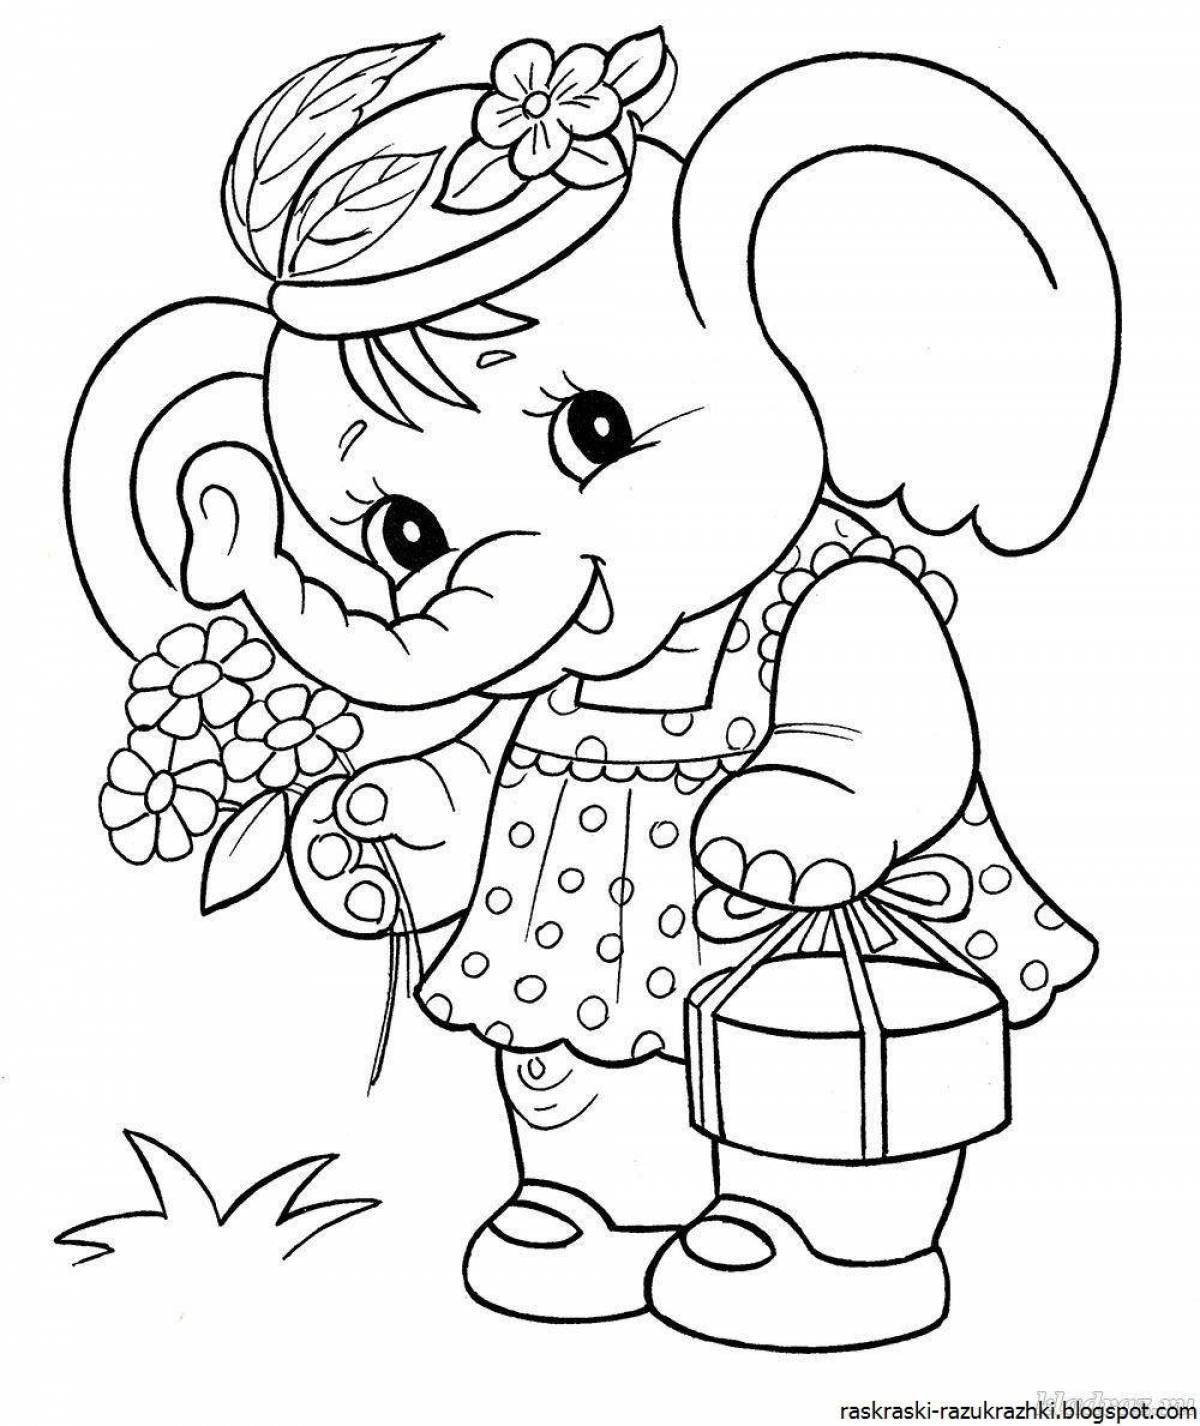 Sparkly 45th Anniversary Coloring Page